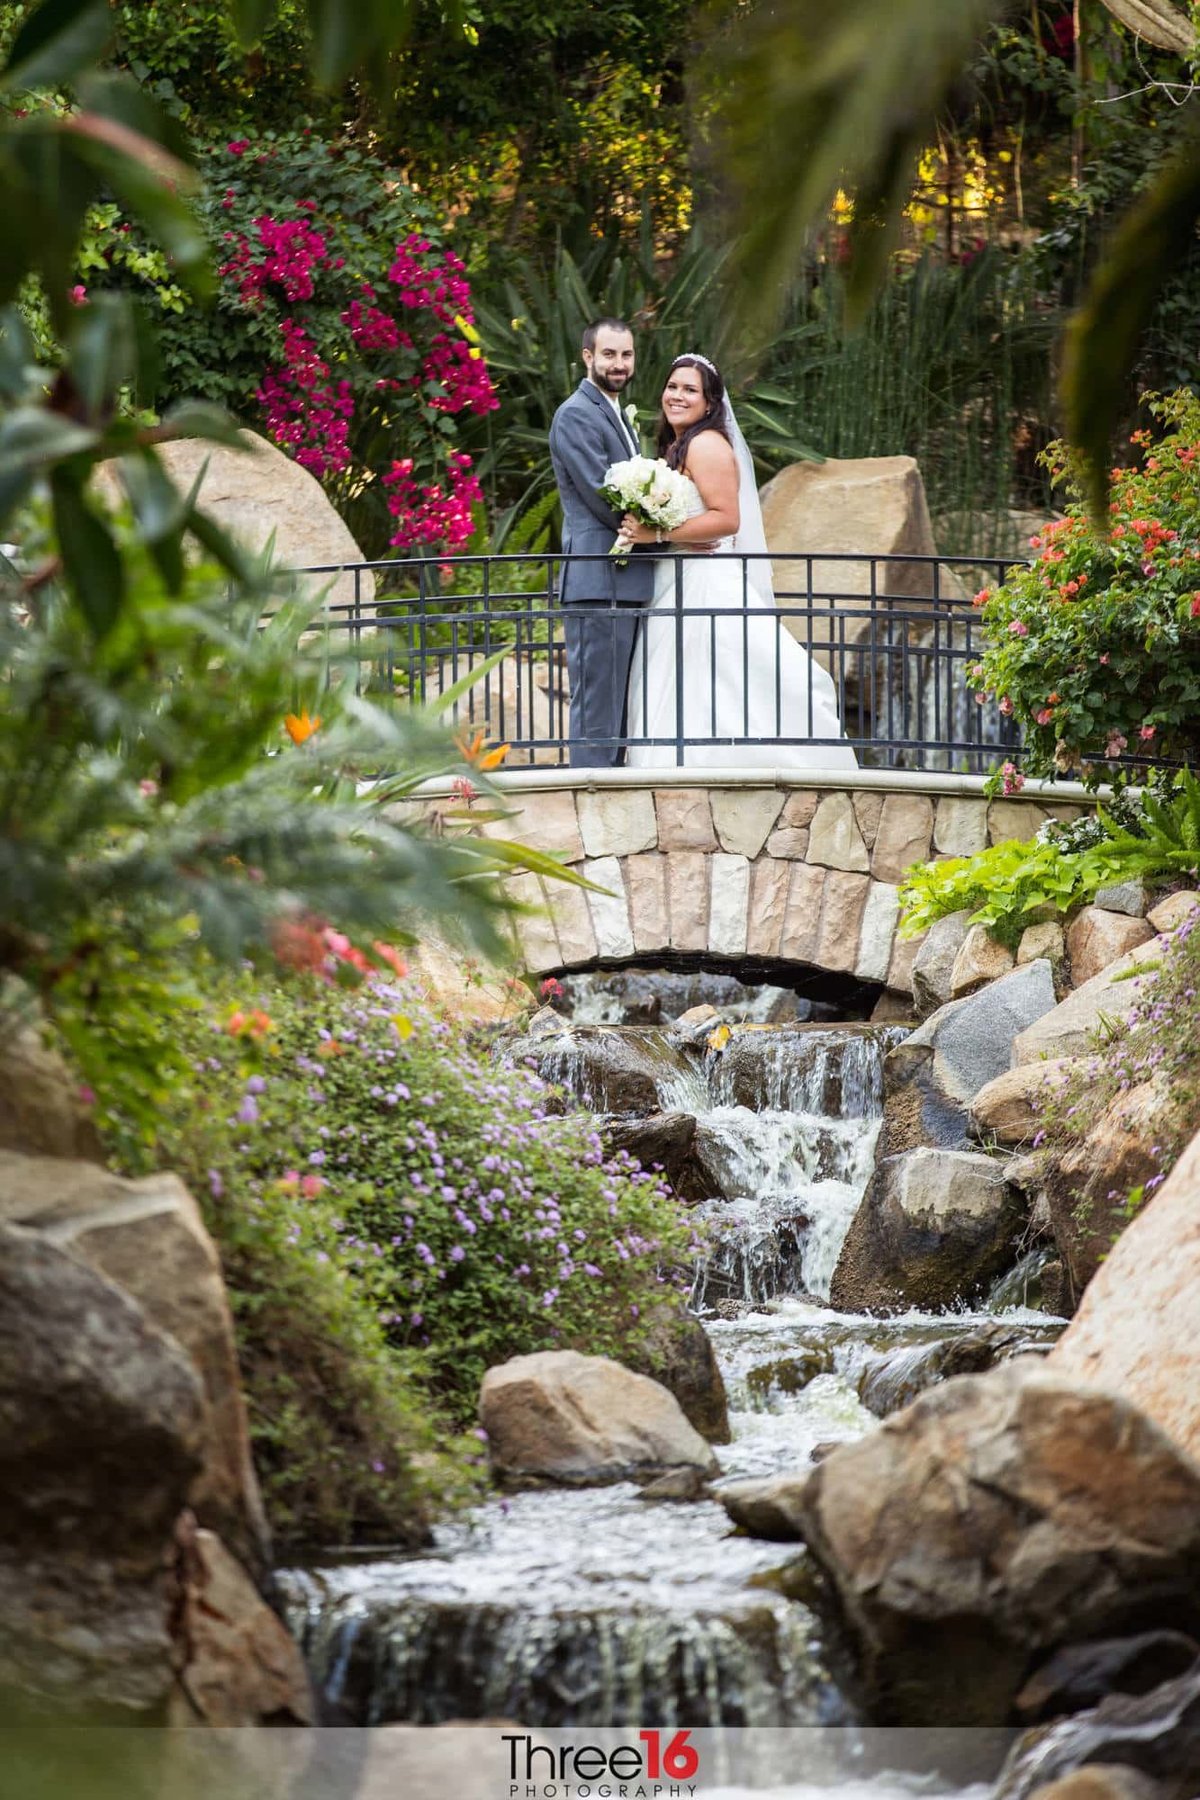 Bride and Groom pose together on a bridge overlooking an amazing waterfall and rock scenery